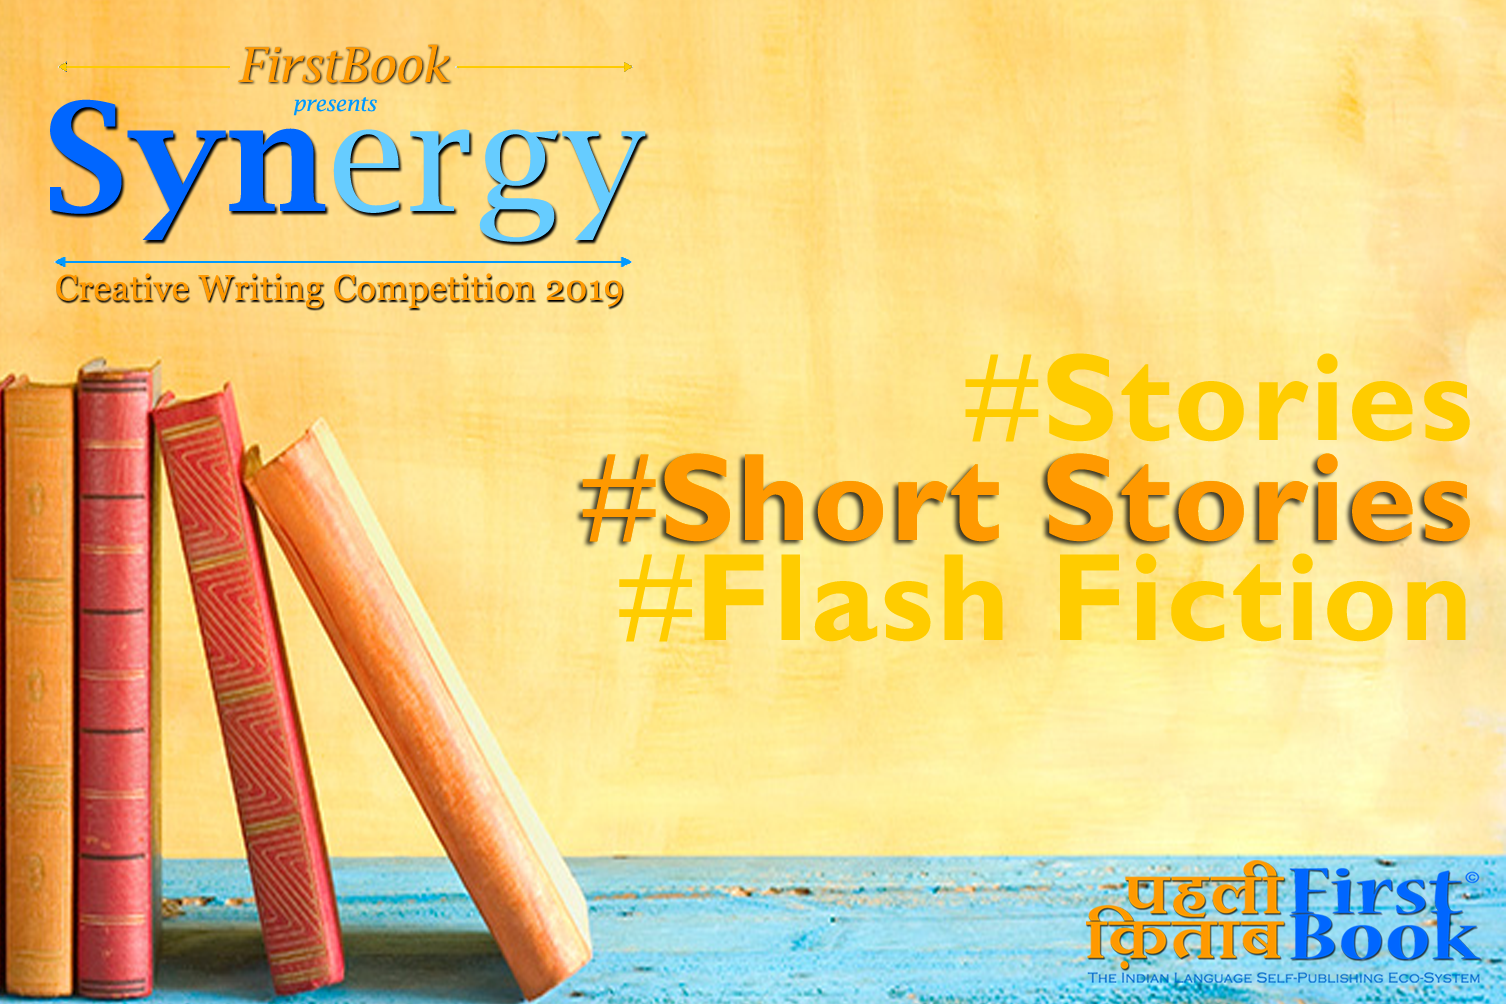 SYNERGY2019 - the First Creative Writing Competition by FirstBook.in.net